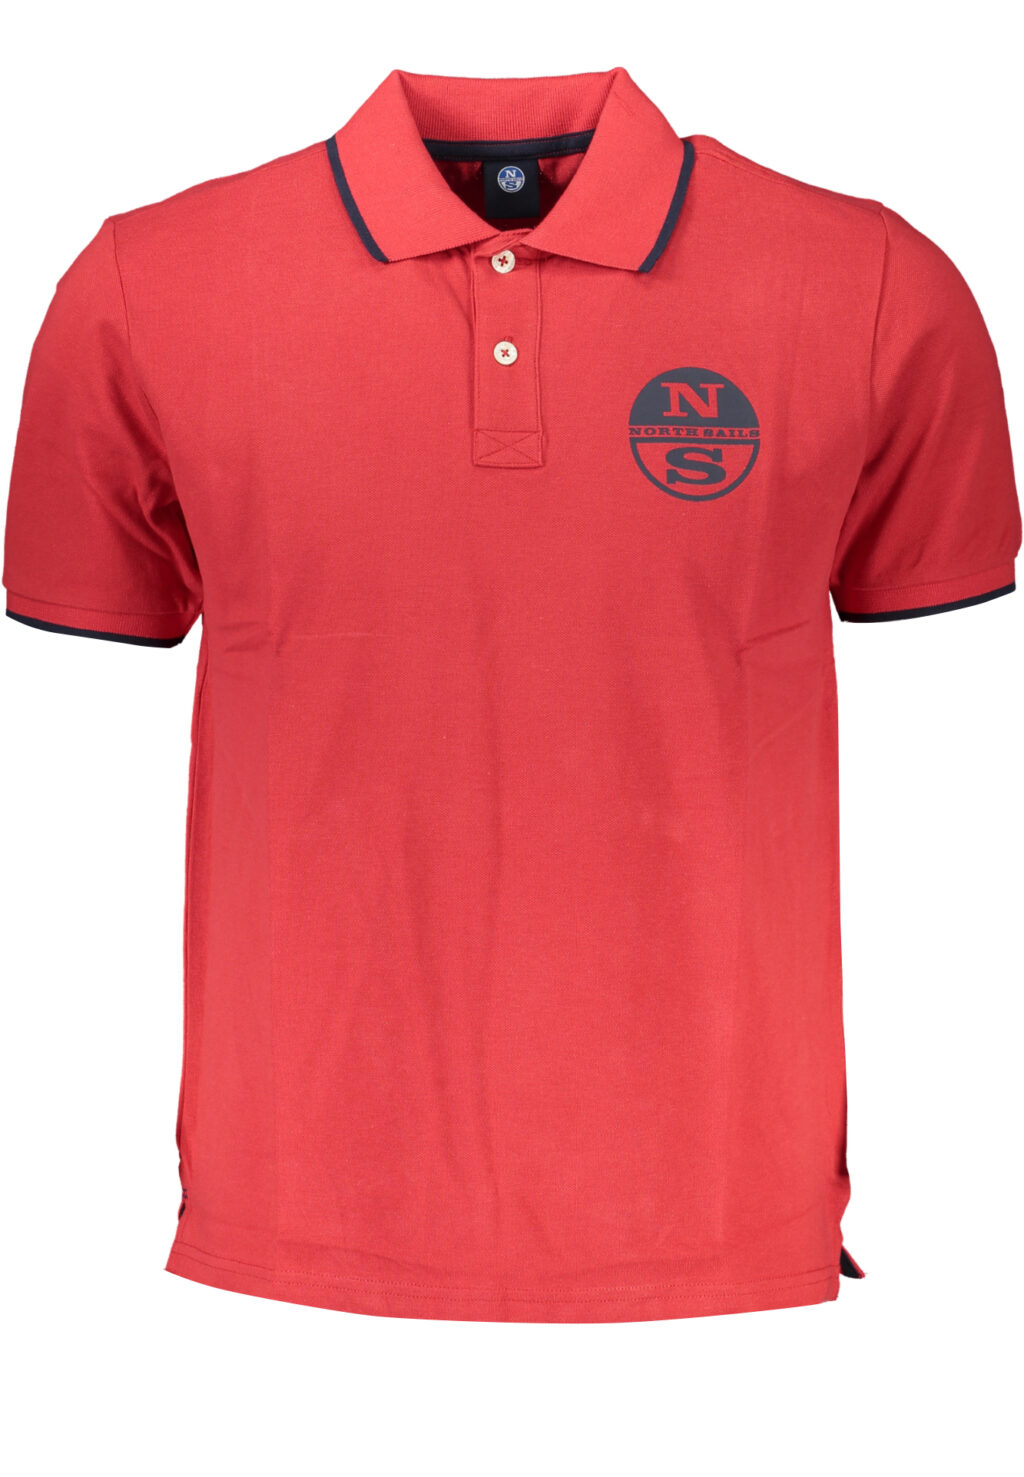 NORTH SAILS MEN'S RED SHORT SLEEVED POLO SHIRT 902828000_RO0230